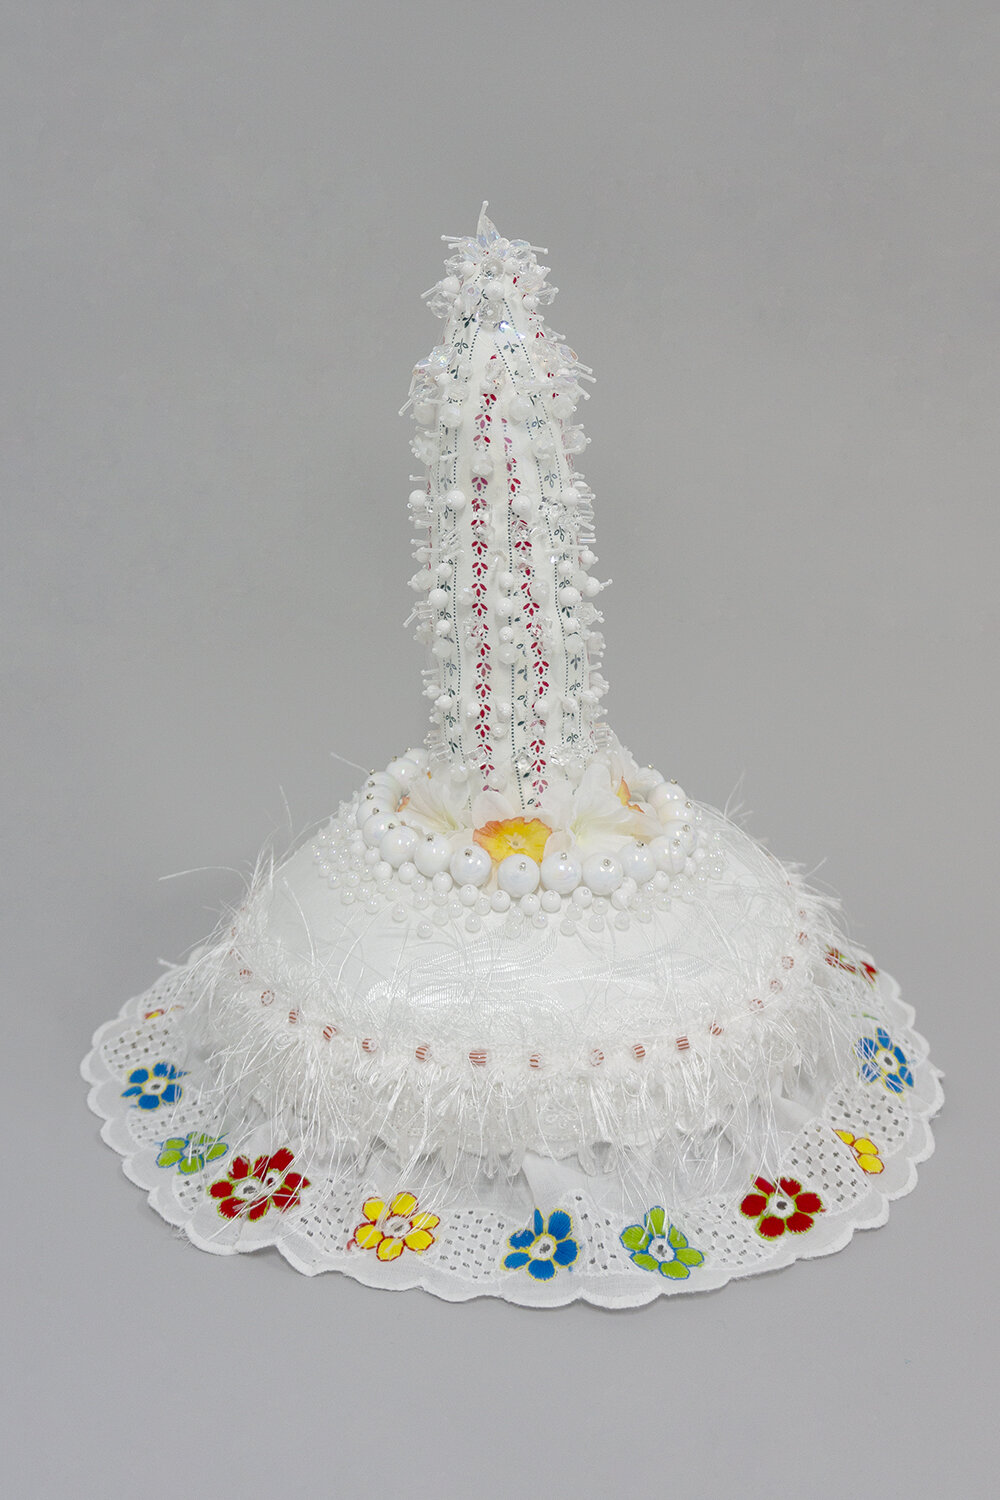   Butter , 2019, Crystal and plastic beads, found fabric, trim, fabric flower, polyester batting, thread, glass stand, 16 x 11 x 11” 